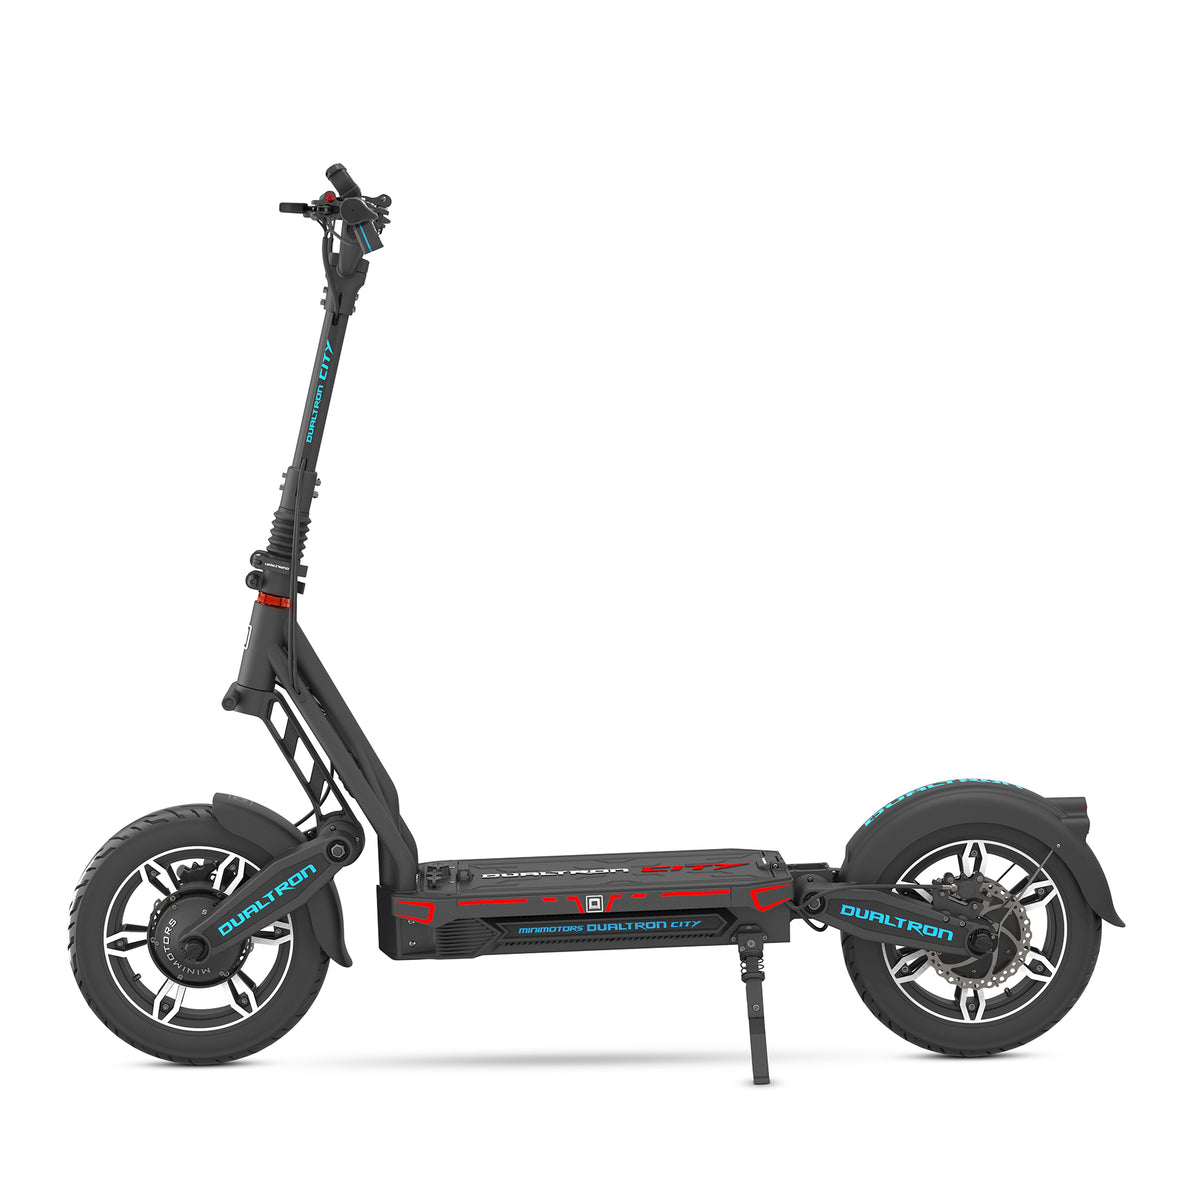 Dualtron City Electric Scooter The Safest Performance Electric